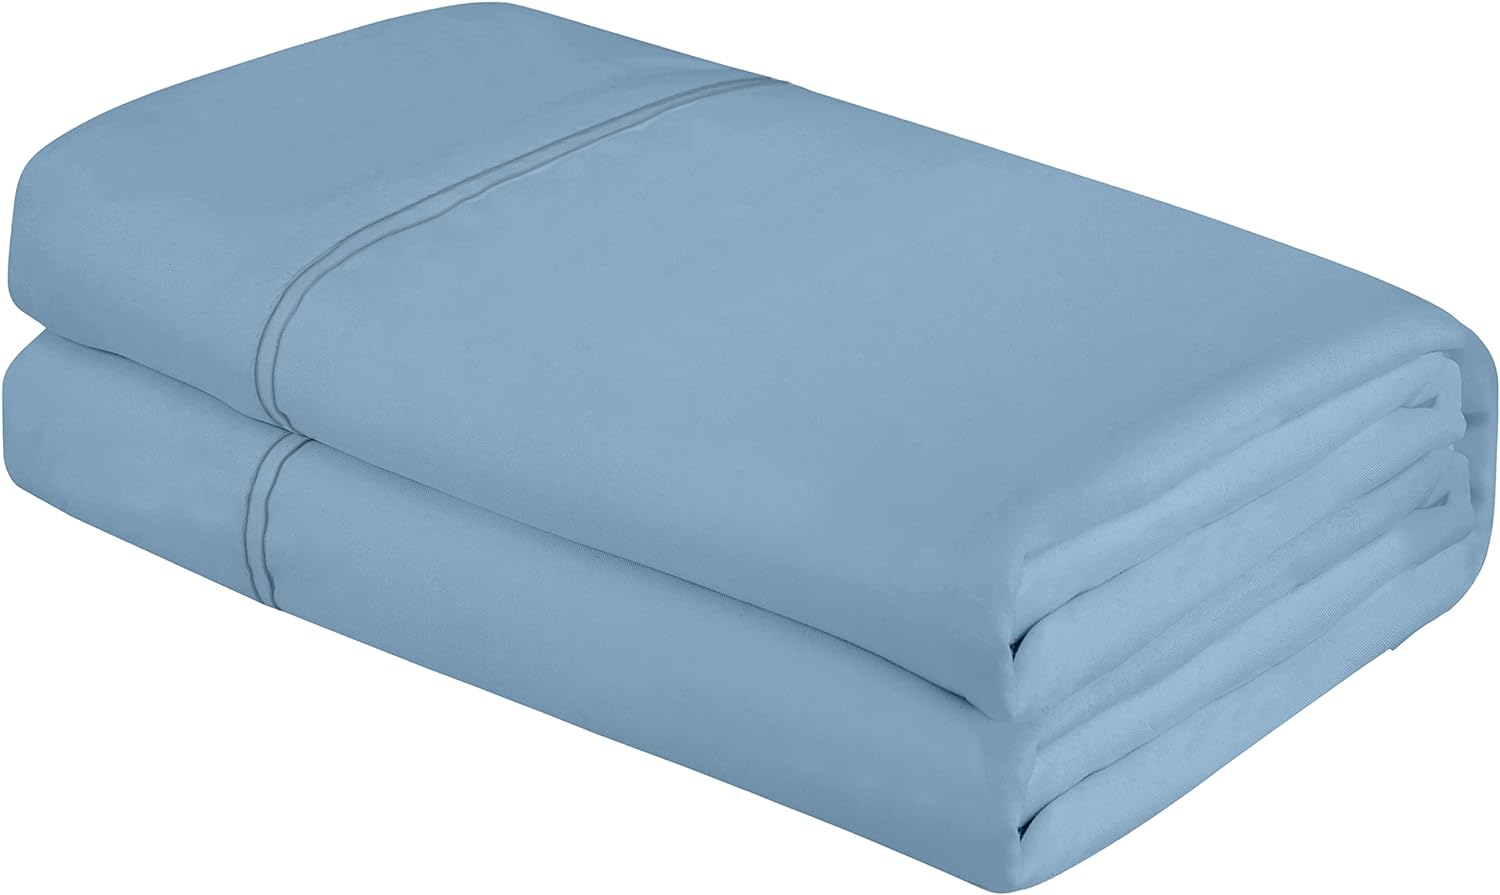 Royale Linens King Size Flat Sheet Only - Brushed 1800 Microfiber - Ultra Soft & Breathable - Wrinkle & Stain Resistant - Hotel Quality Flat Sheet Sold Separately - Top Sheet For Bed (King, Lake Blue)